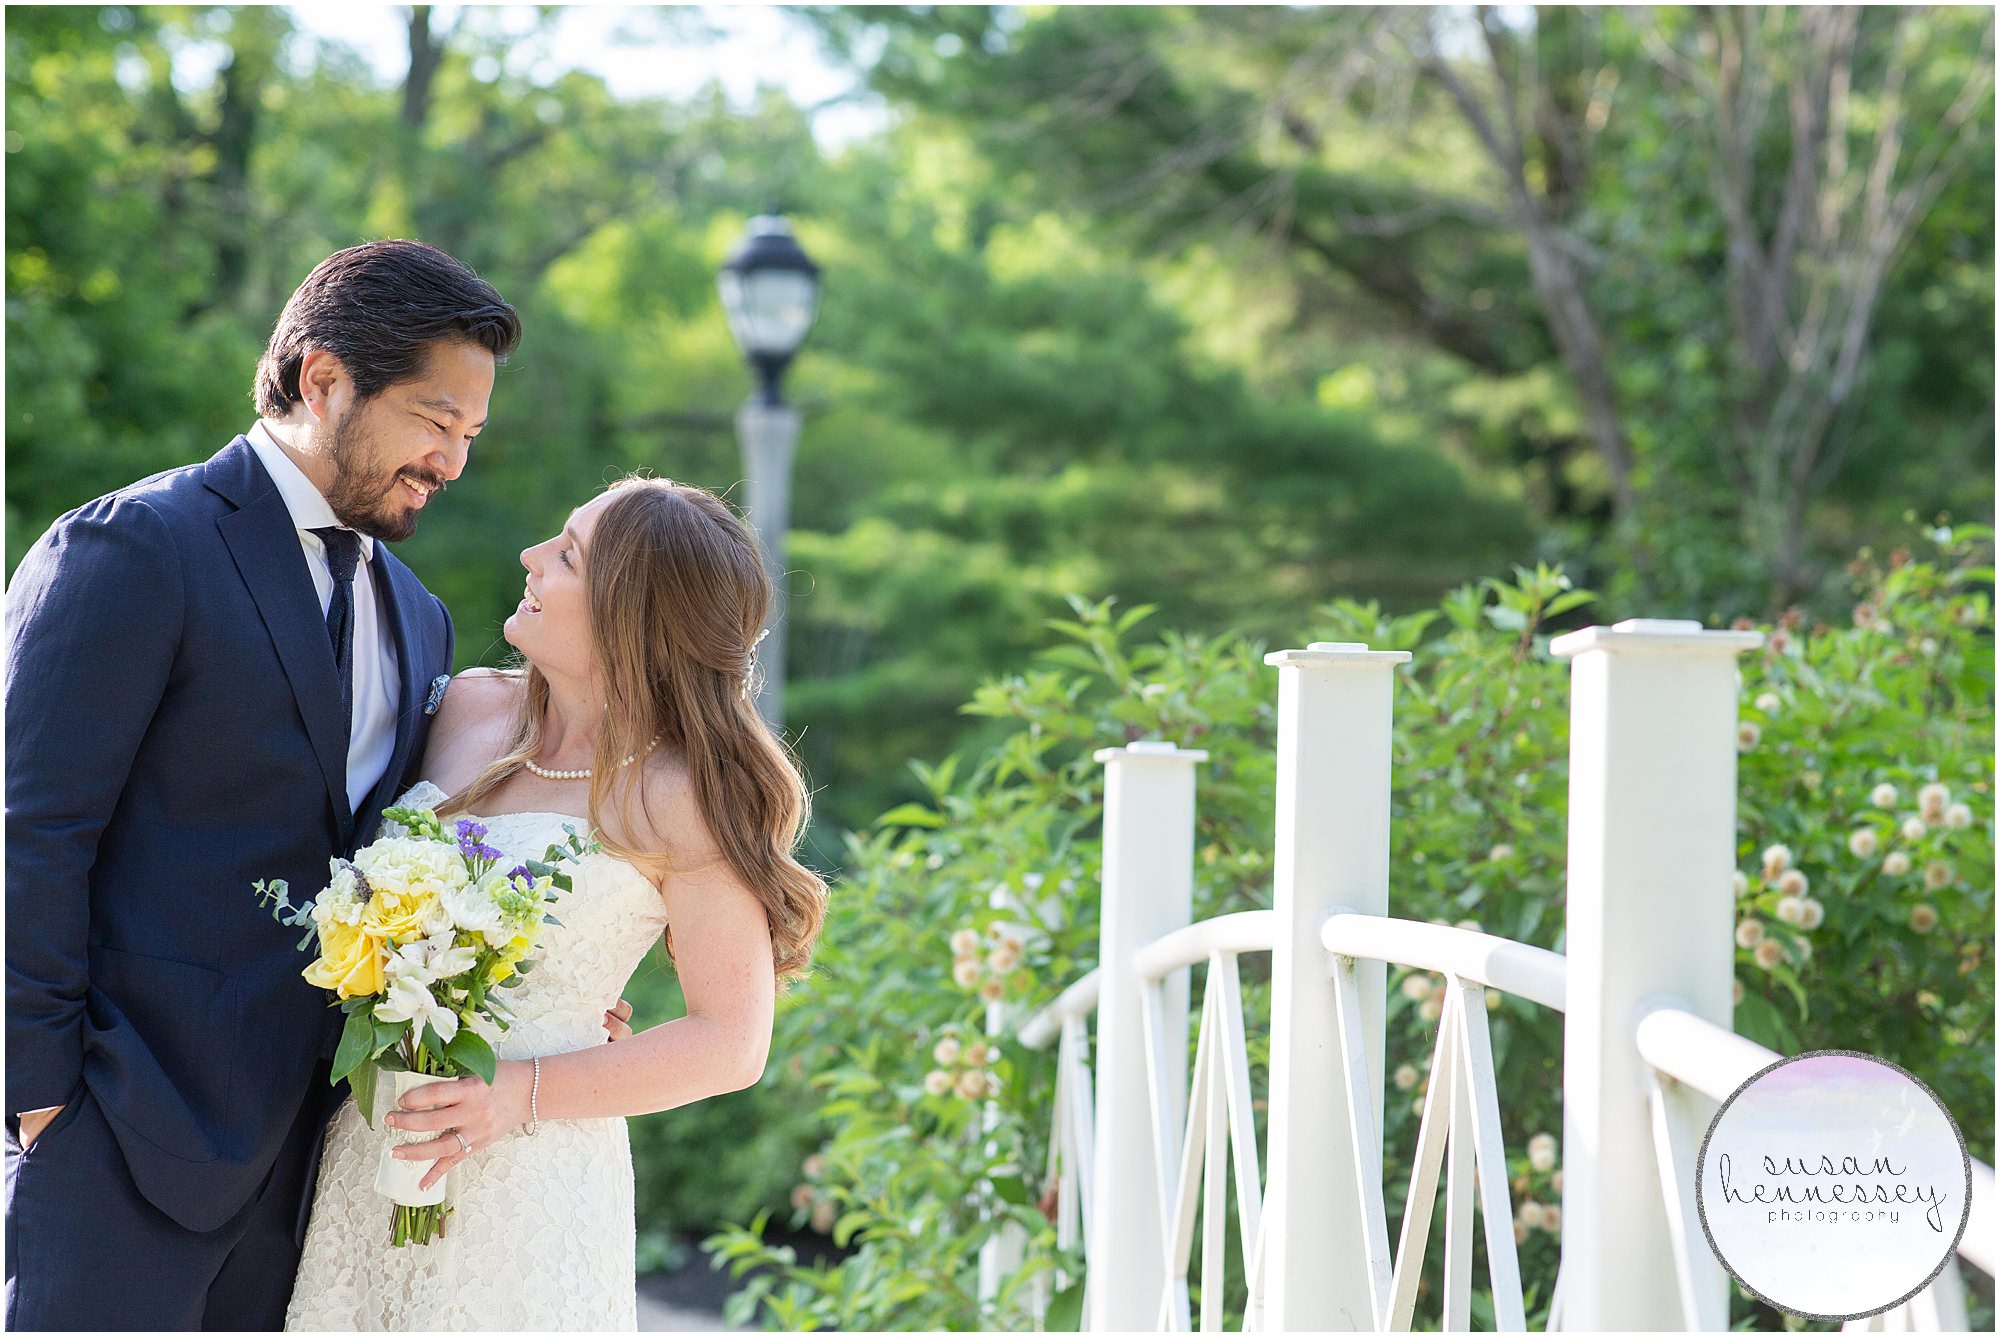 Sayen gardens in Hamilton, NJ is the perfect location for a simple wedding